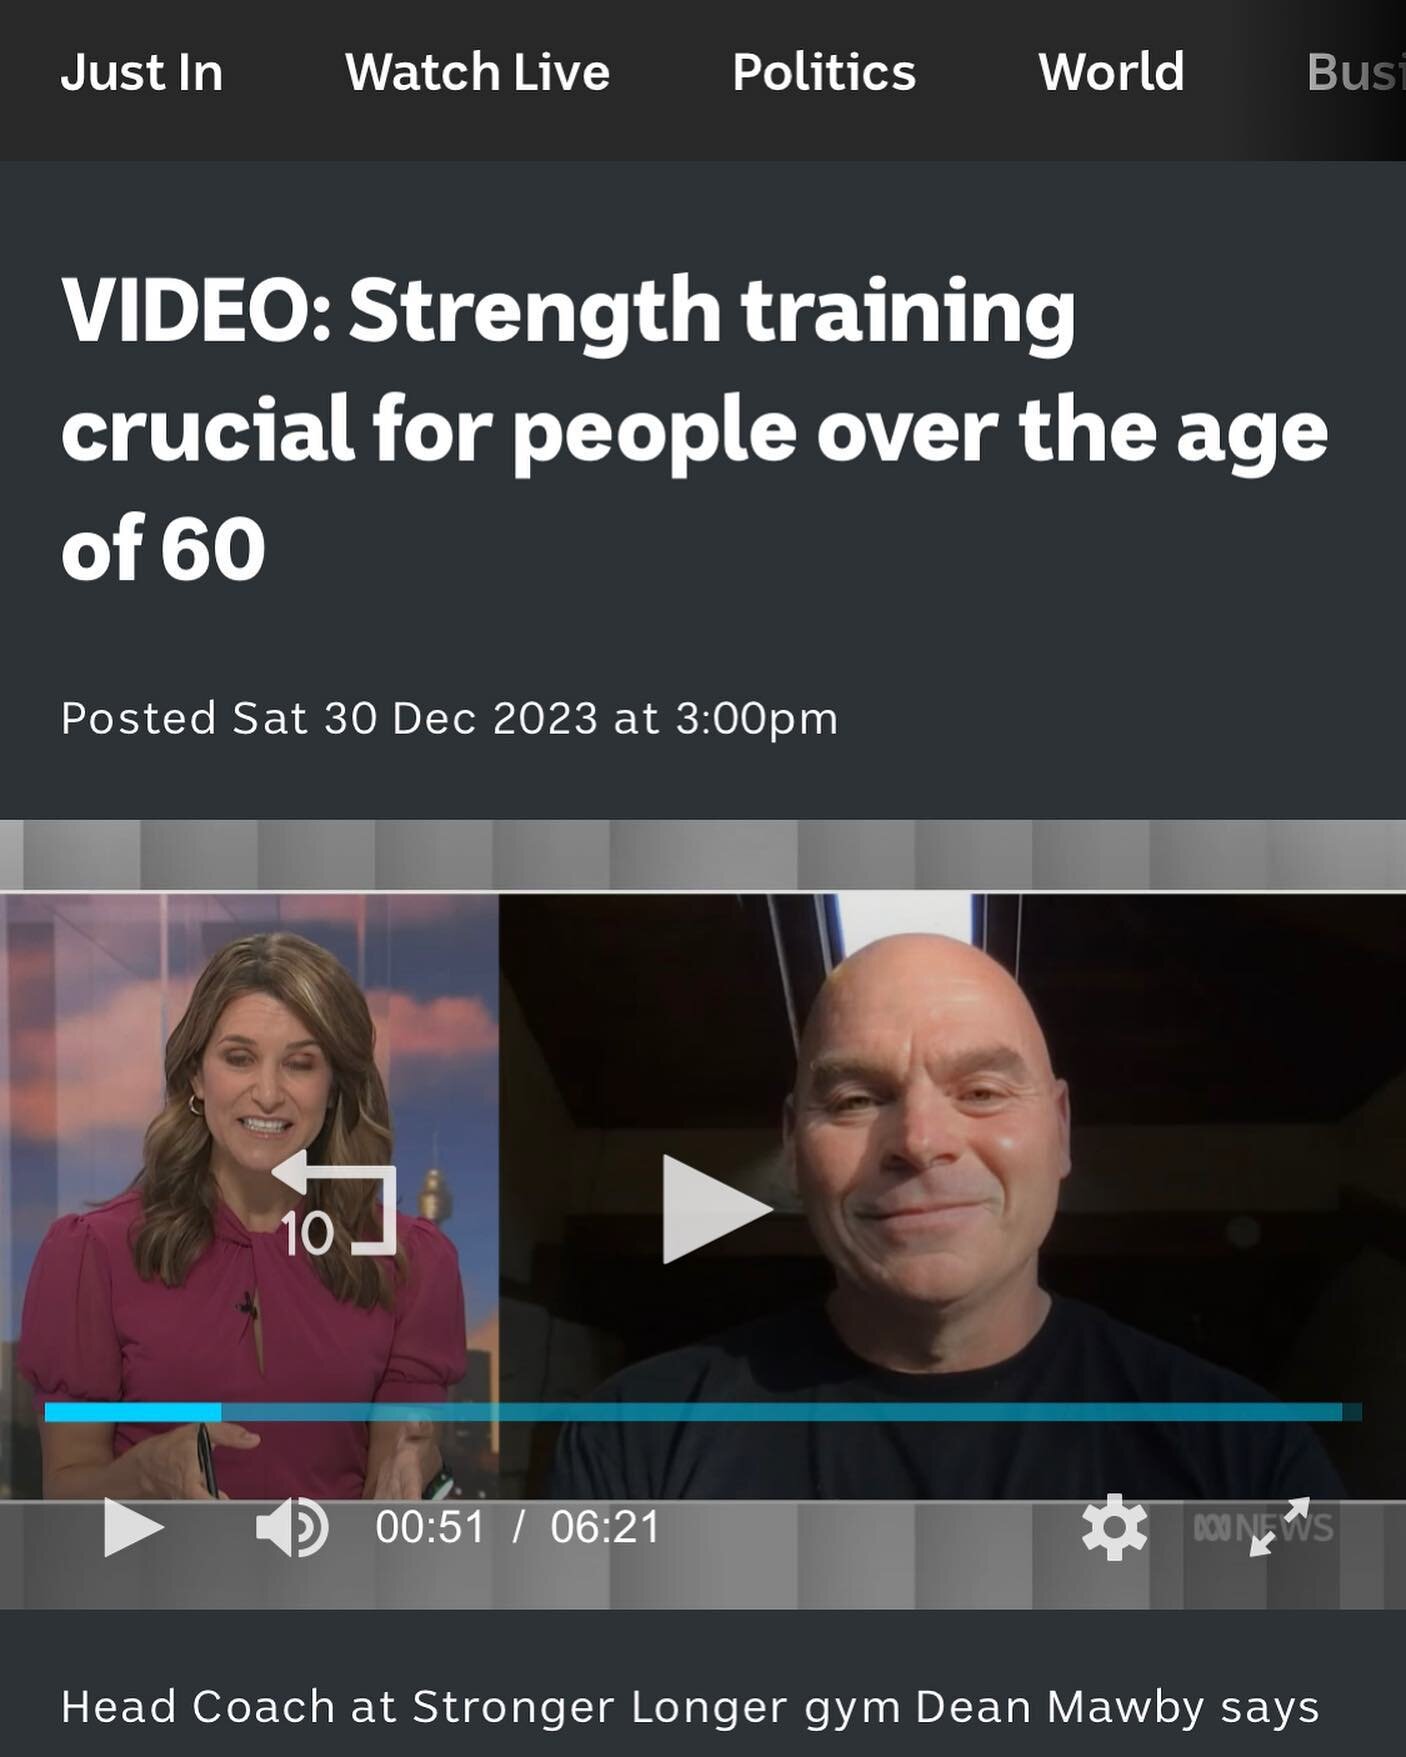 ABC News requested an interview with Dean last week to chat about why strength training is crucial for people over the age of 60.  Link to interview is in bio &amp; can also be found on our website media page along with many other articles &amp; inte